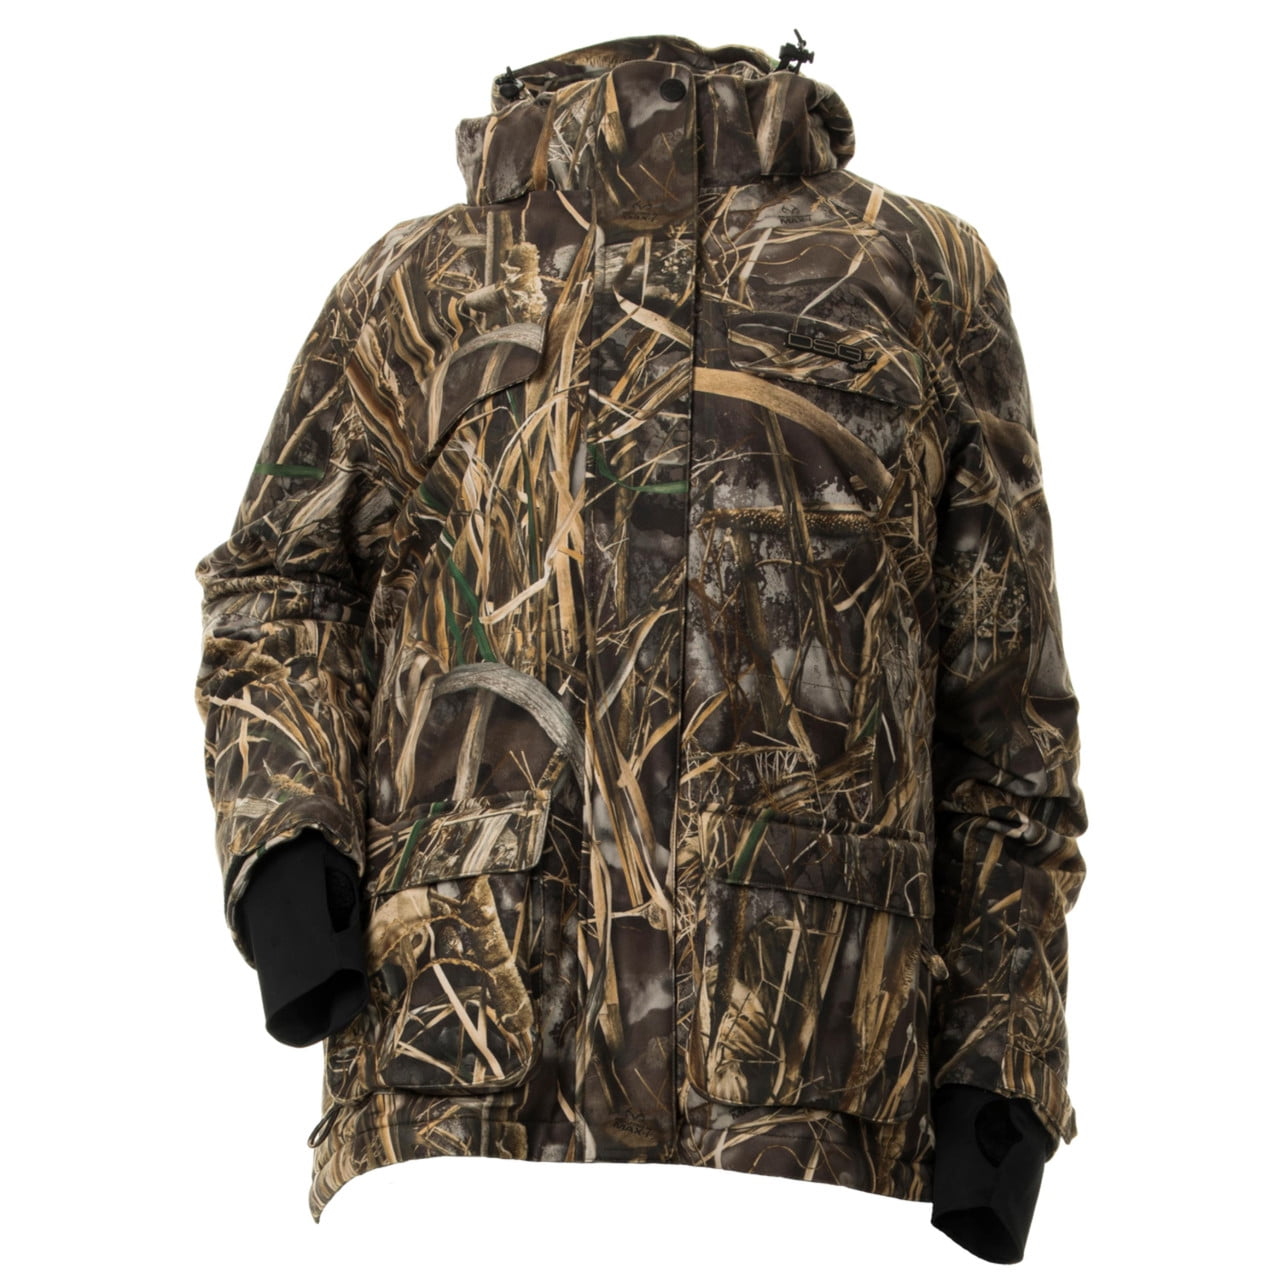 DSG Outerwear Kylie 4.0 3-in-1 Hunting Jacket, Realtree Max-7, 5XL 